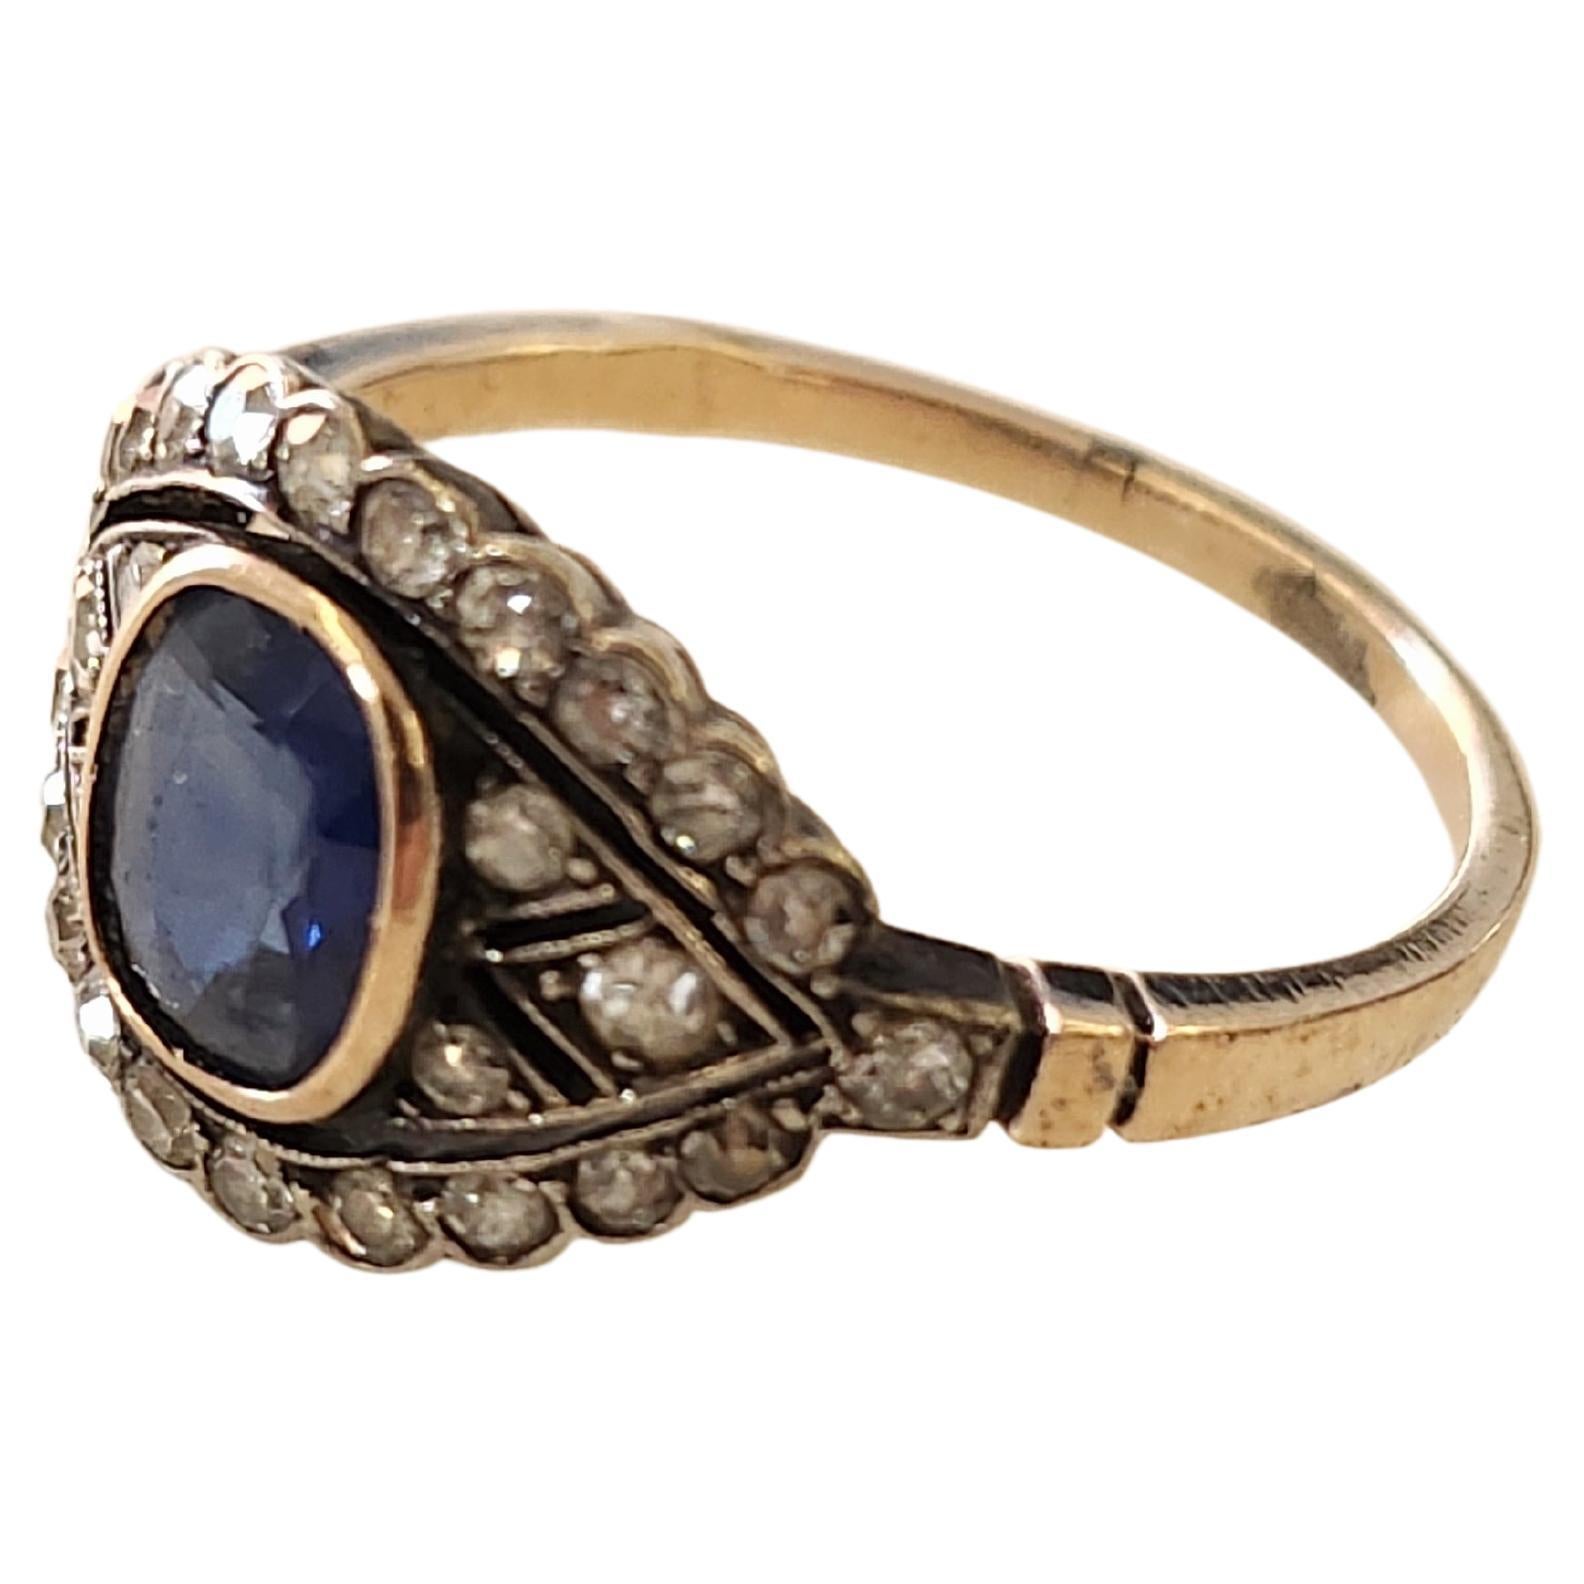 Antique 14k gold russian ring centered with 1 natural blue sapphire in oval cut with a diameter of 7.85mm×6.80mm flanked with several single cut diamonds estimate weight of 0.60 ct ring is hall marked 56 imperial russian gold standard and later with